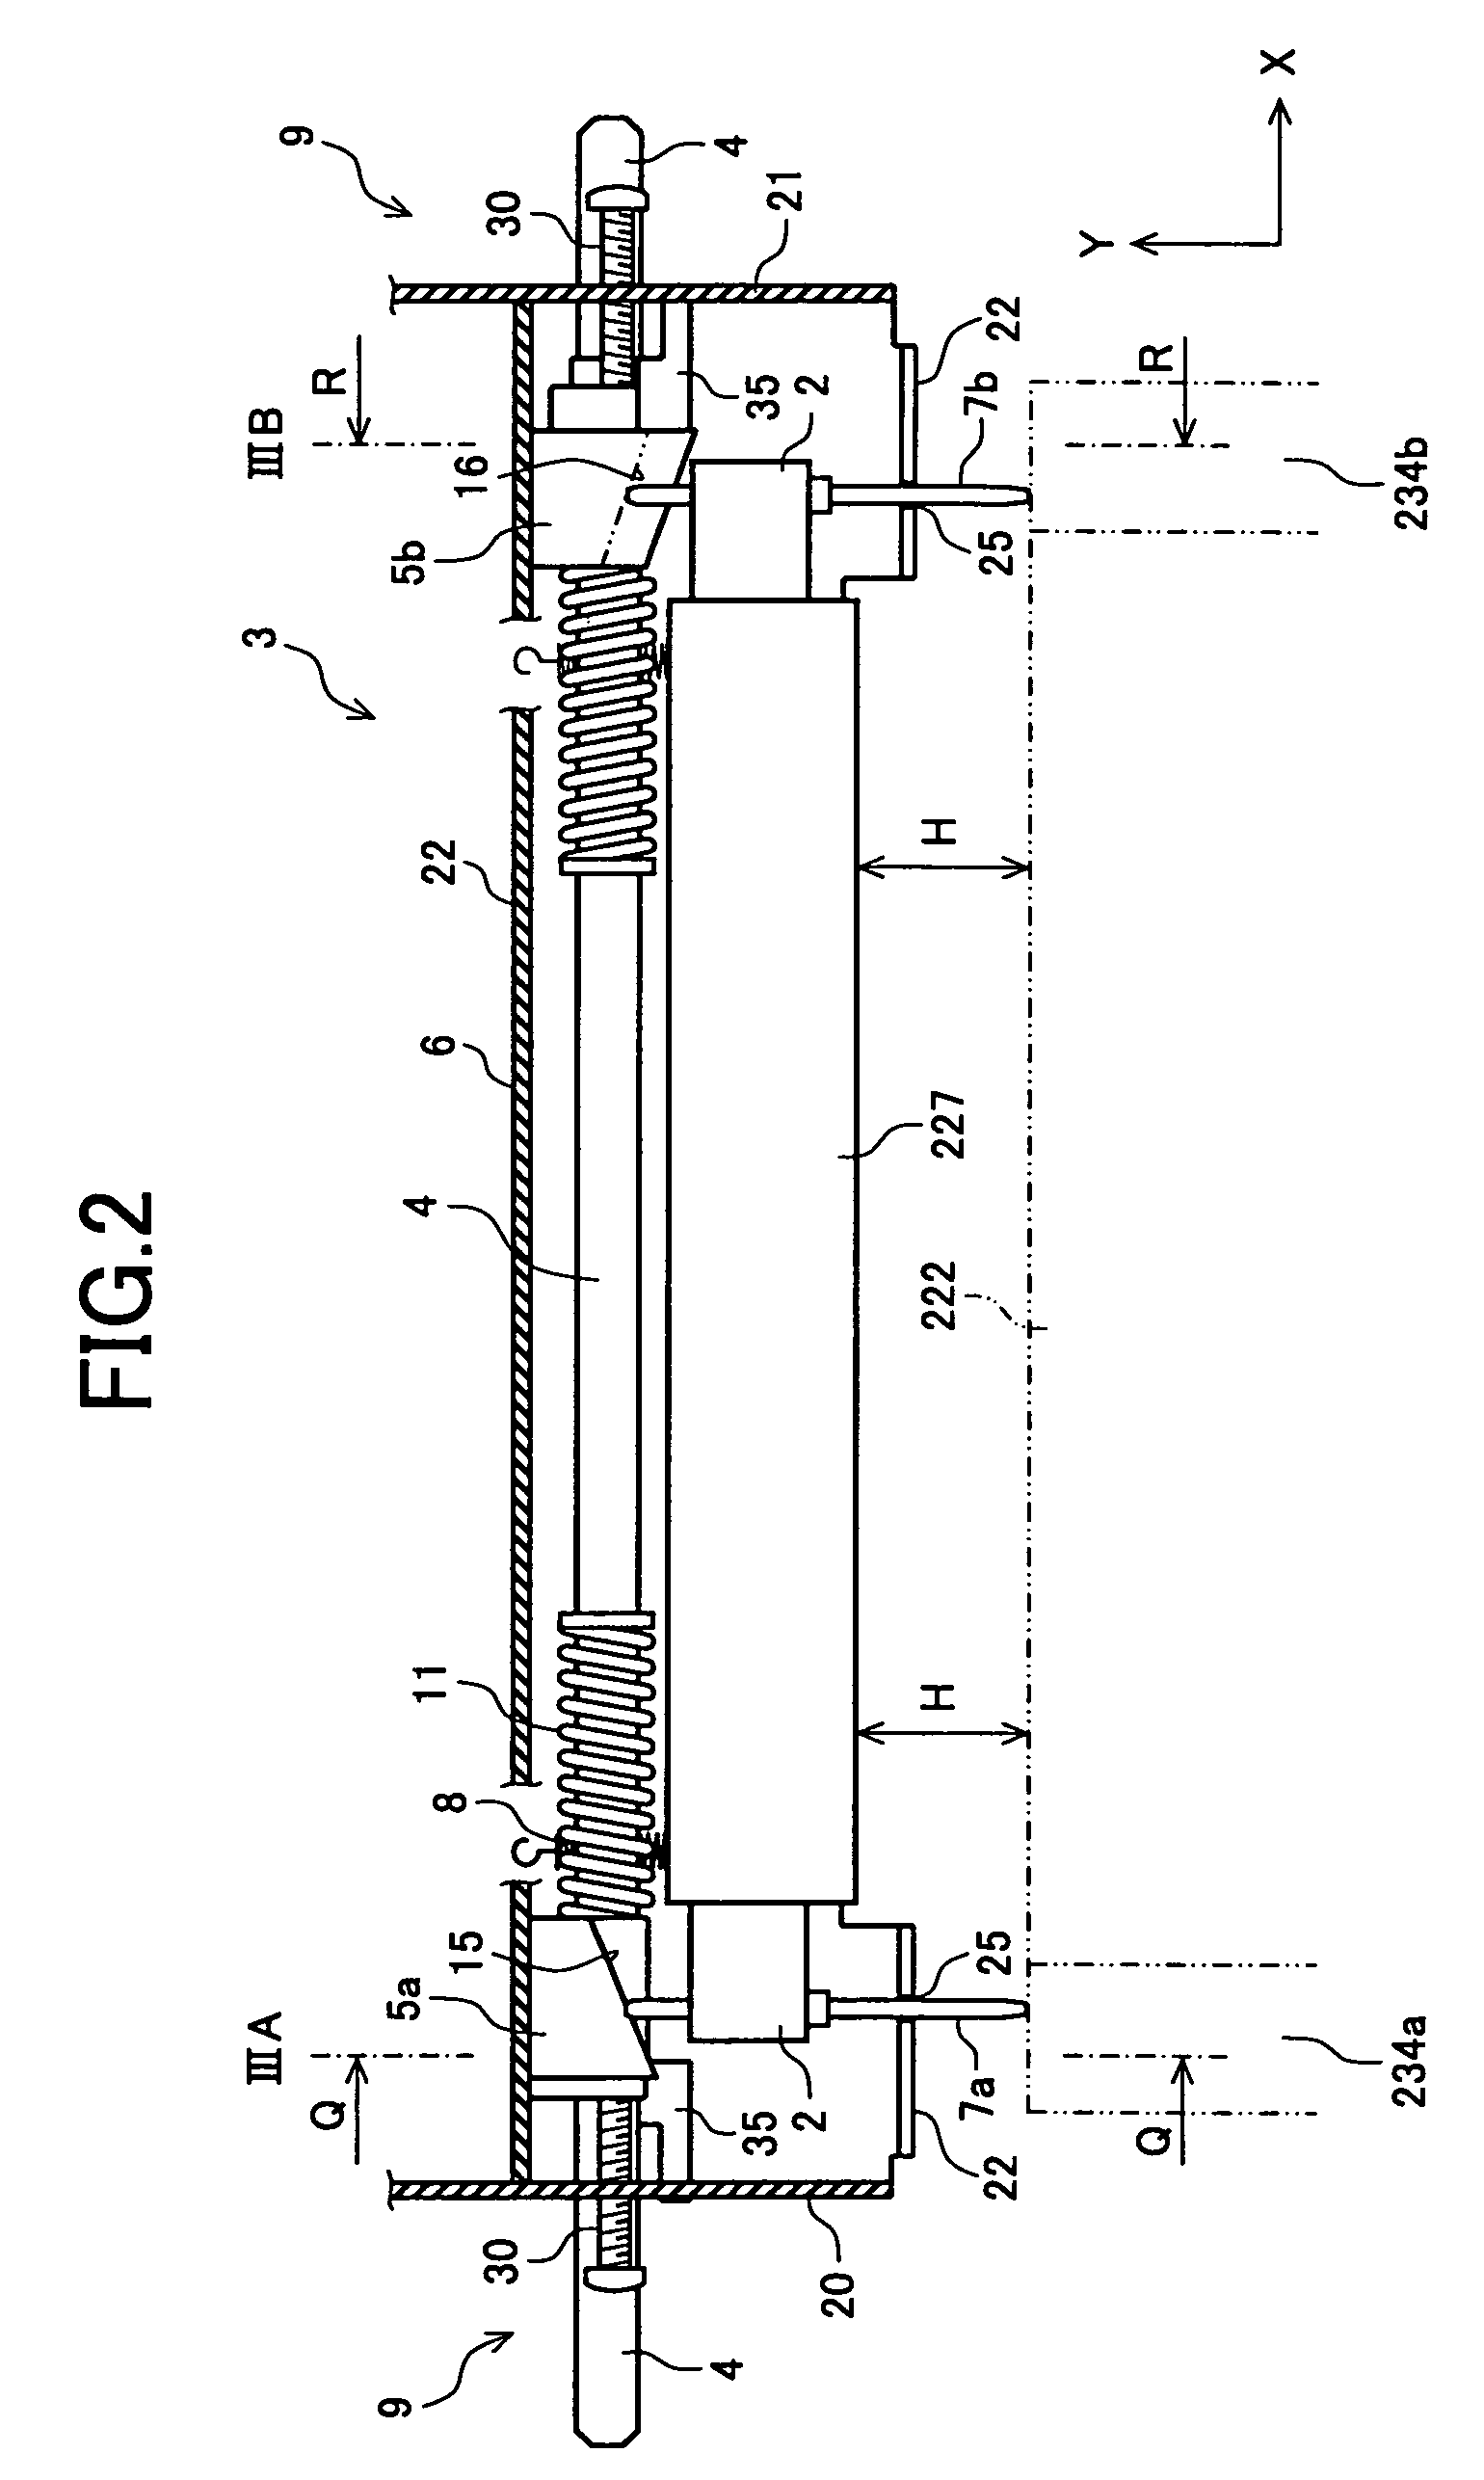 Image forming apparatus and method for adjusting the interval between a write head and a photoreceptor